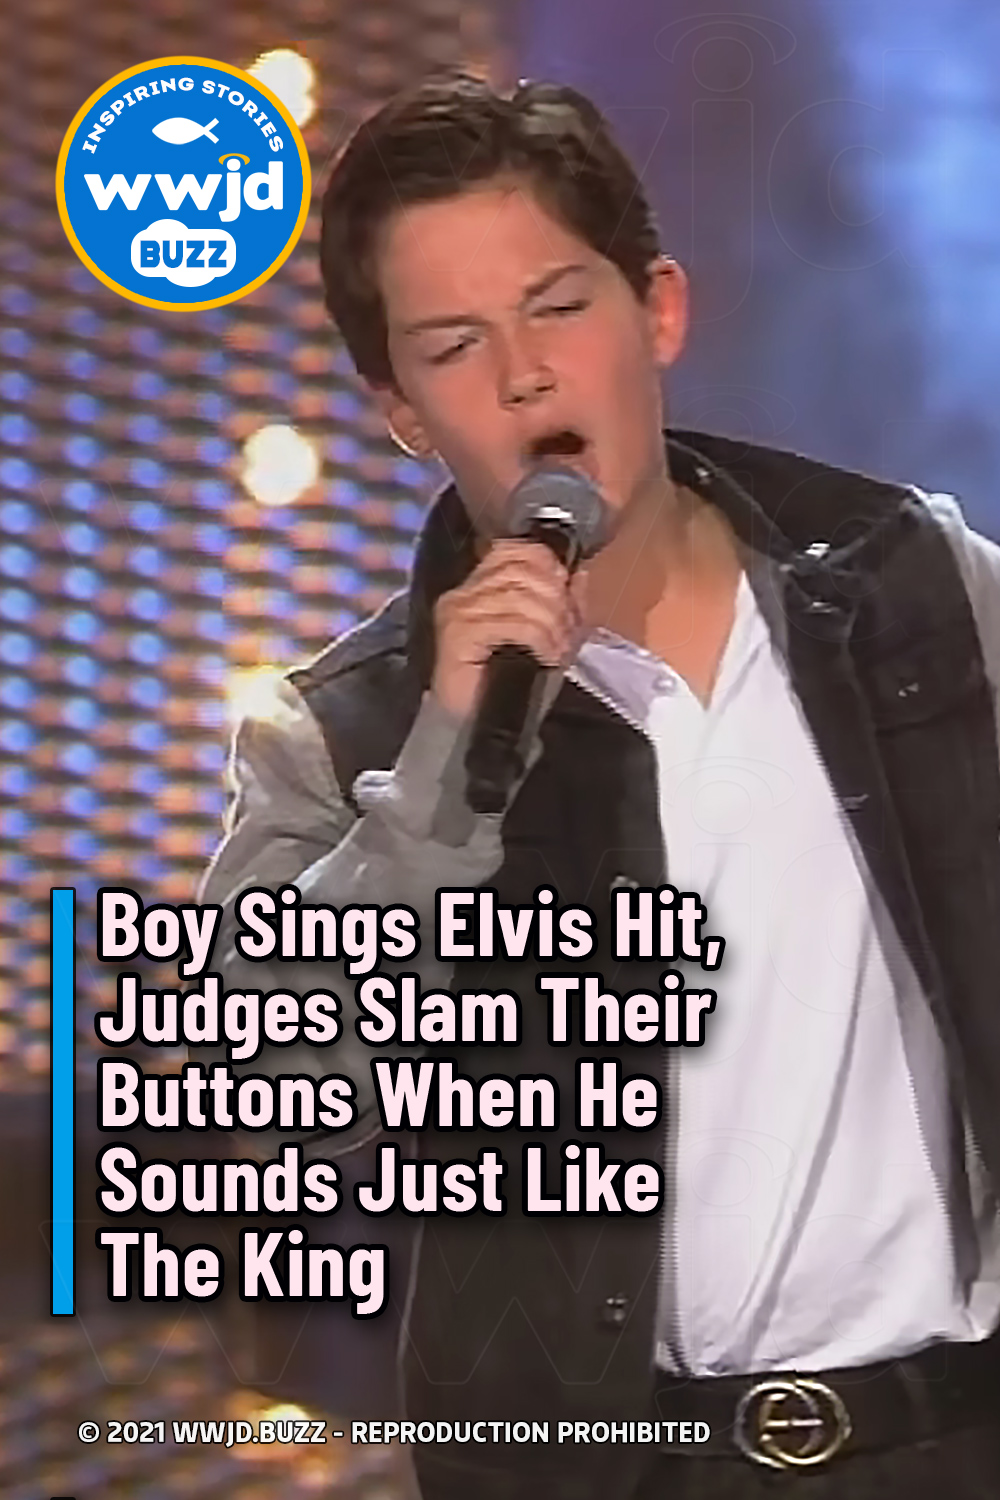 Boy Sings Elvis Hit, Judges Slam Their Buttons When He Sounds Just Like The King